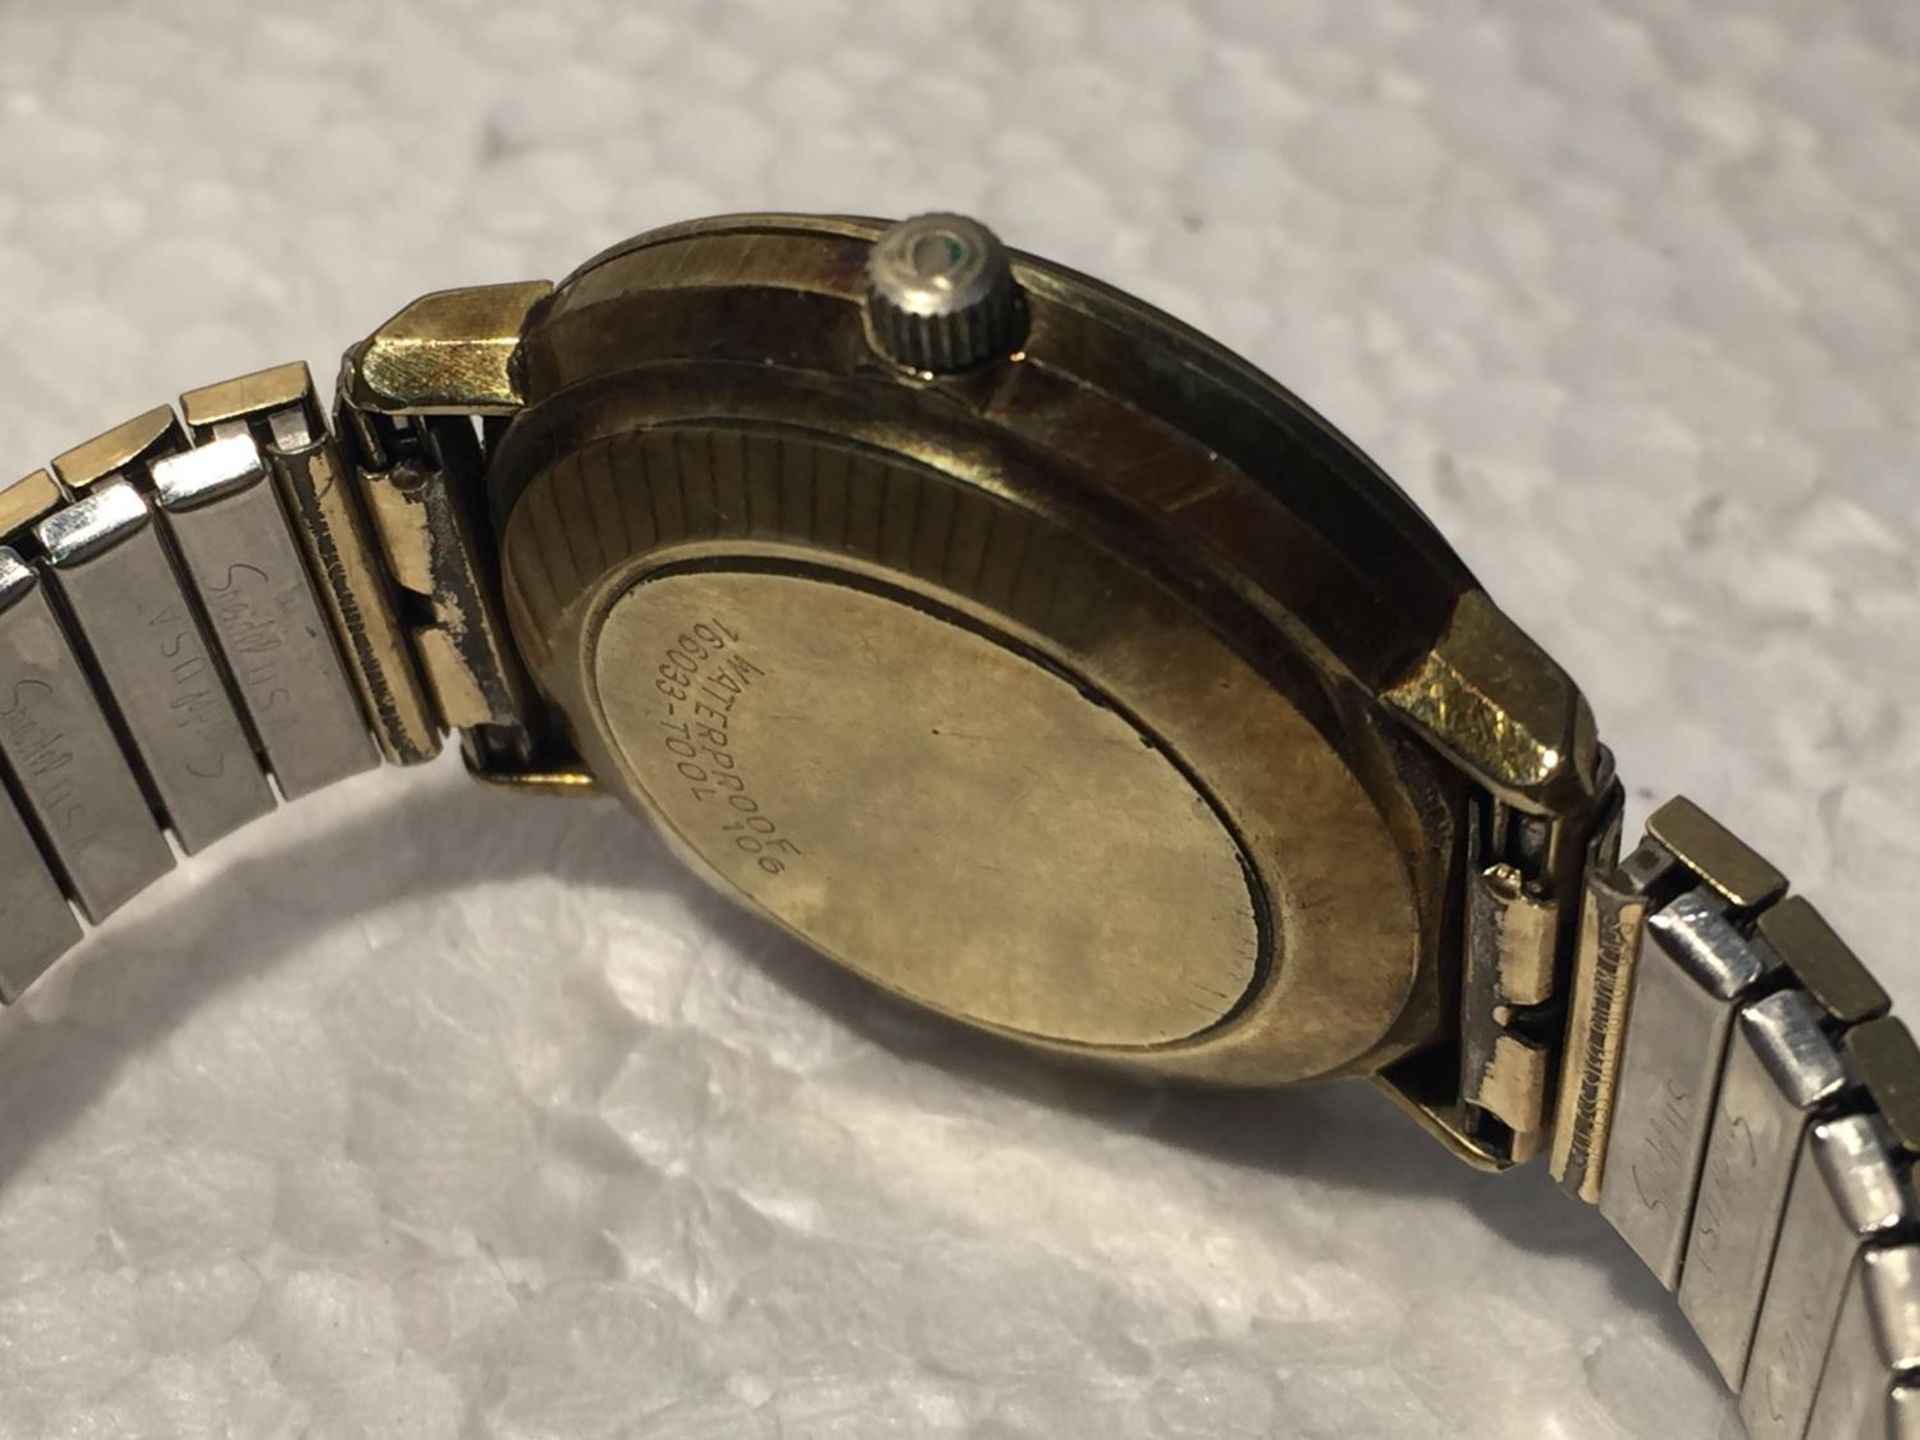 A VINTAGE OMEGA AUTOMATIC DE VILLE WATCH POSSIBLY 9CT GOLD WRIST WATCH IN WORKING ORDER WHEN - Image 5 of 7